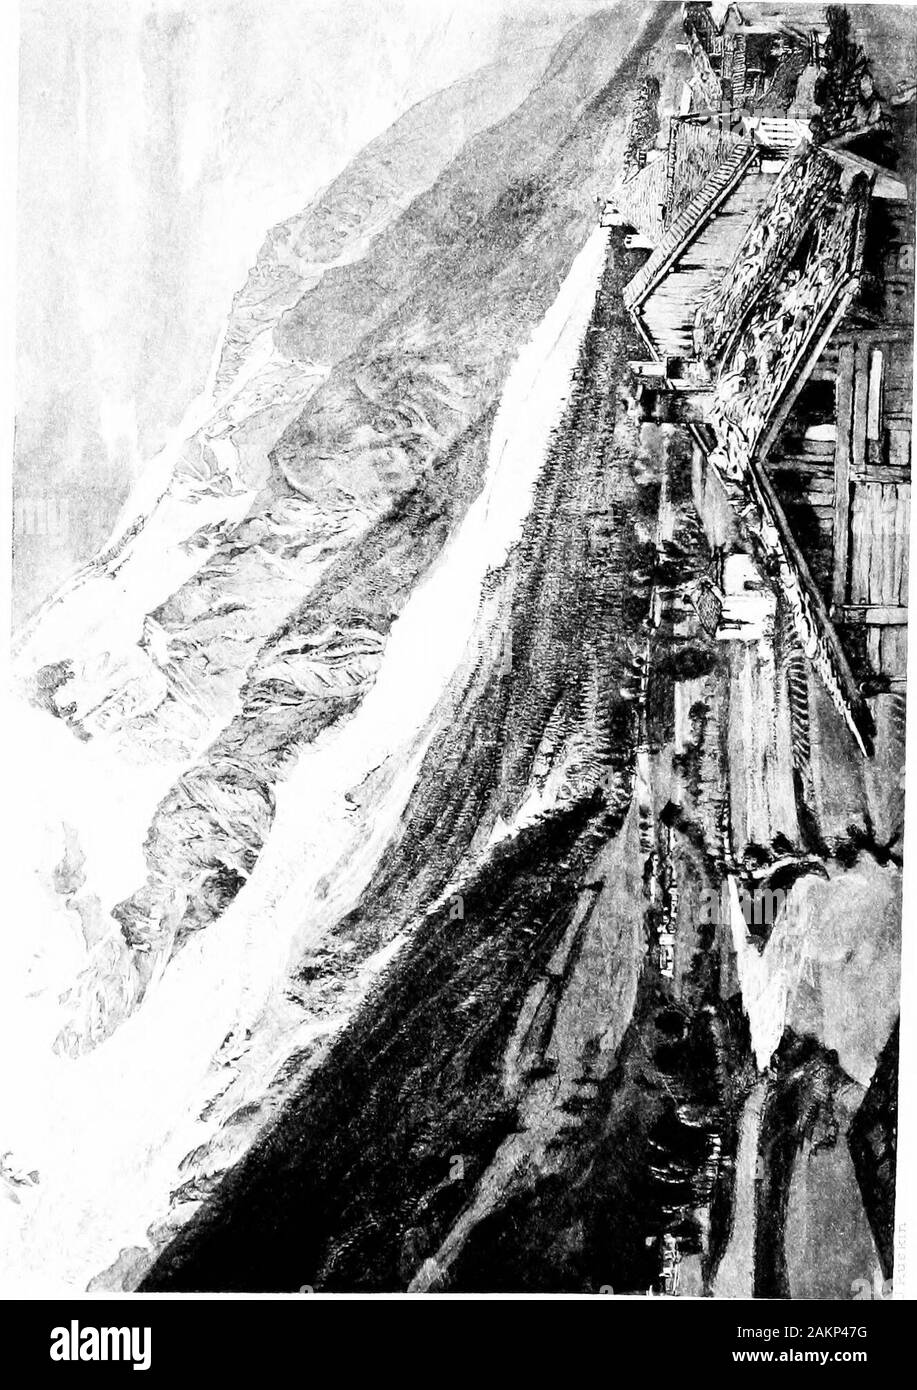 The works of John Ruskin . t Moss and Wild Strawberrv. CATALOGUE OF REFERENCE SERIES 35 91. The Glacier des Bossons, Chamouni. Drawing by Ruskin.1 92. Chiaroscuro Study for School Exercise in Pure Pencil.2 A copy of Turners Arona. J. R. 1874. 93. Rhemfelden? Drawing by Ruskin. 94. Fragments of Mosaic Pavement.* Drawing by Ruskin. 95. The Southern Porch of St. Vulfran, Abbeville.5 Drawing by Ruskin. 96. Study of the Child in Tintorefs Presentation in the Temple.6 Water-colour drawing by Ruskin. 97. The Presentation in the Temple. Black and white study by Ruskin.7 98. Clouds.* Water-colour study Stock Photo